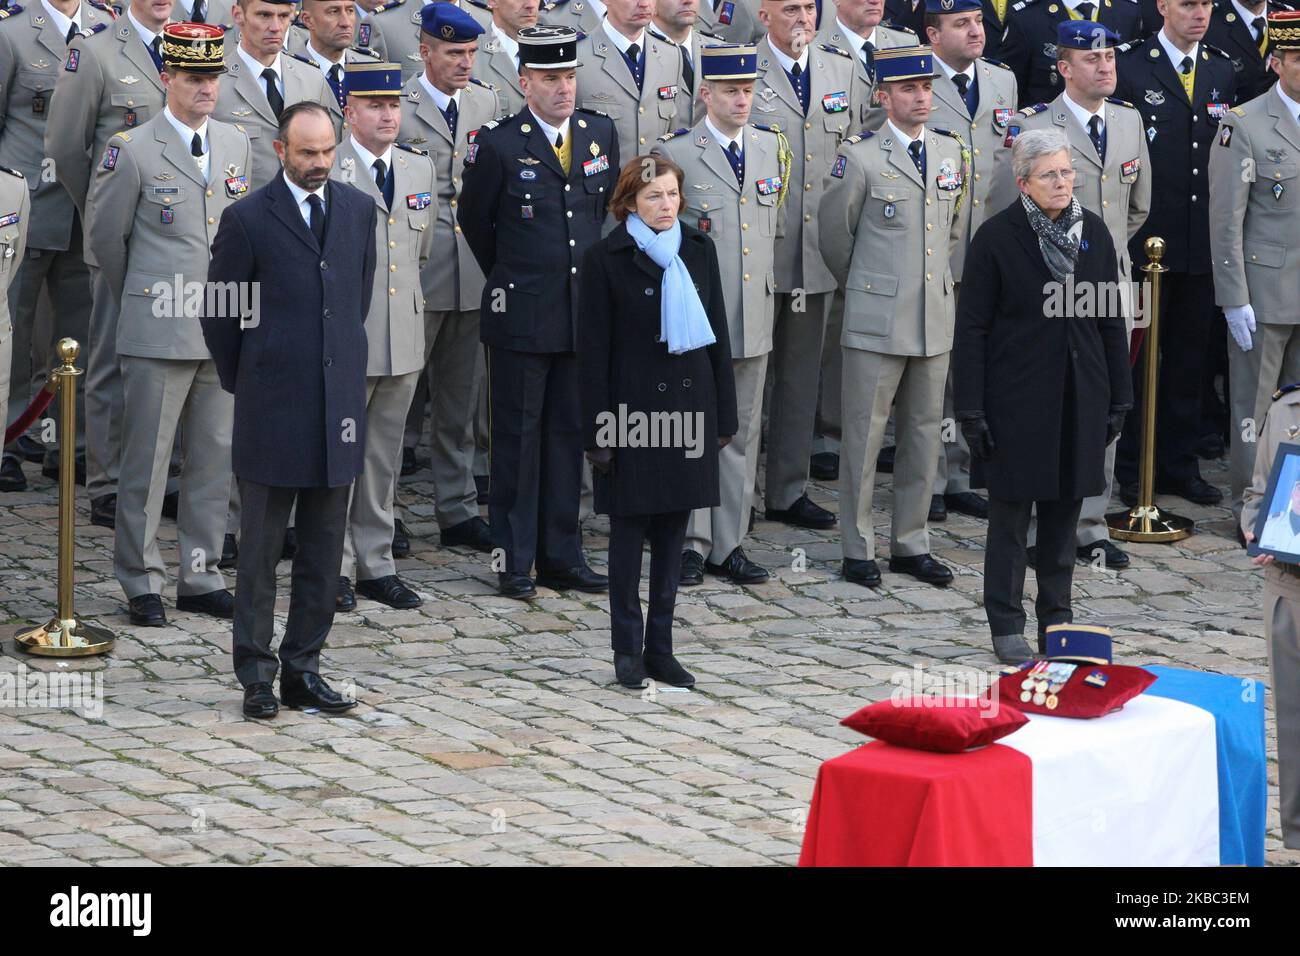 (1st row from L to R) French Prime Minister Edouard Philippe, French Defence Minister Florence Parly and French Junior Defence Minister Genevieve Darrieussecq attend a tribute ceremony on December 2, 2019 at the Invalides monument, in Paris, for the 13 French soldiers killed in Mali. In its biggest military funeral in decades, France is honoring 13 soldiers killed when their helicopters collided over Mali while on a mission fighting extremists affiliated with the Islamic State group. (Photo by Michel Stoupak/NurPhoto) Stock Photo